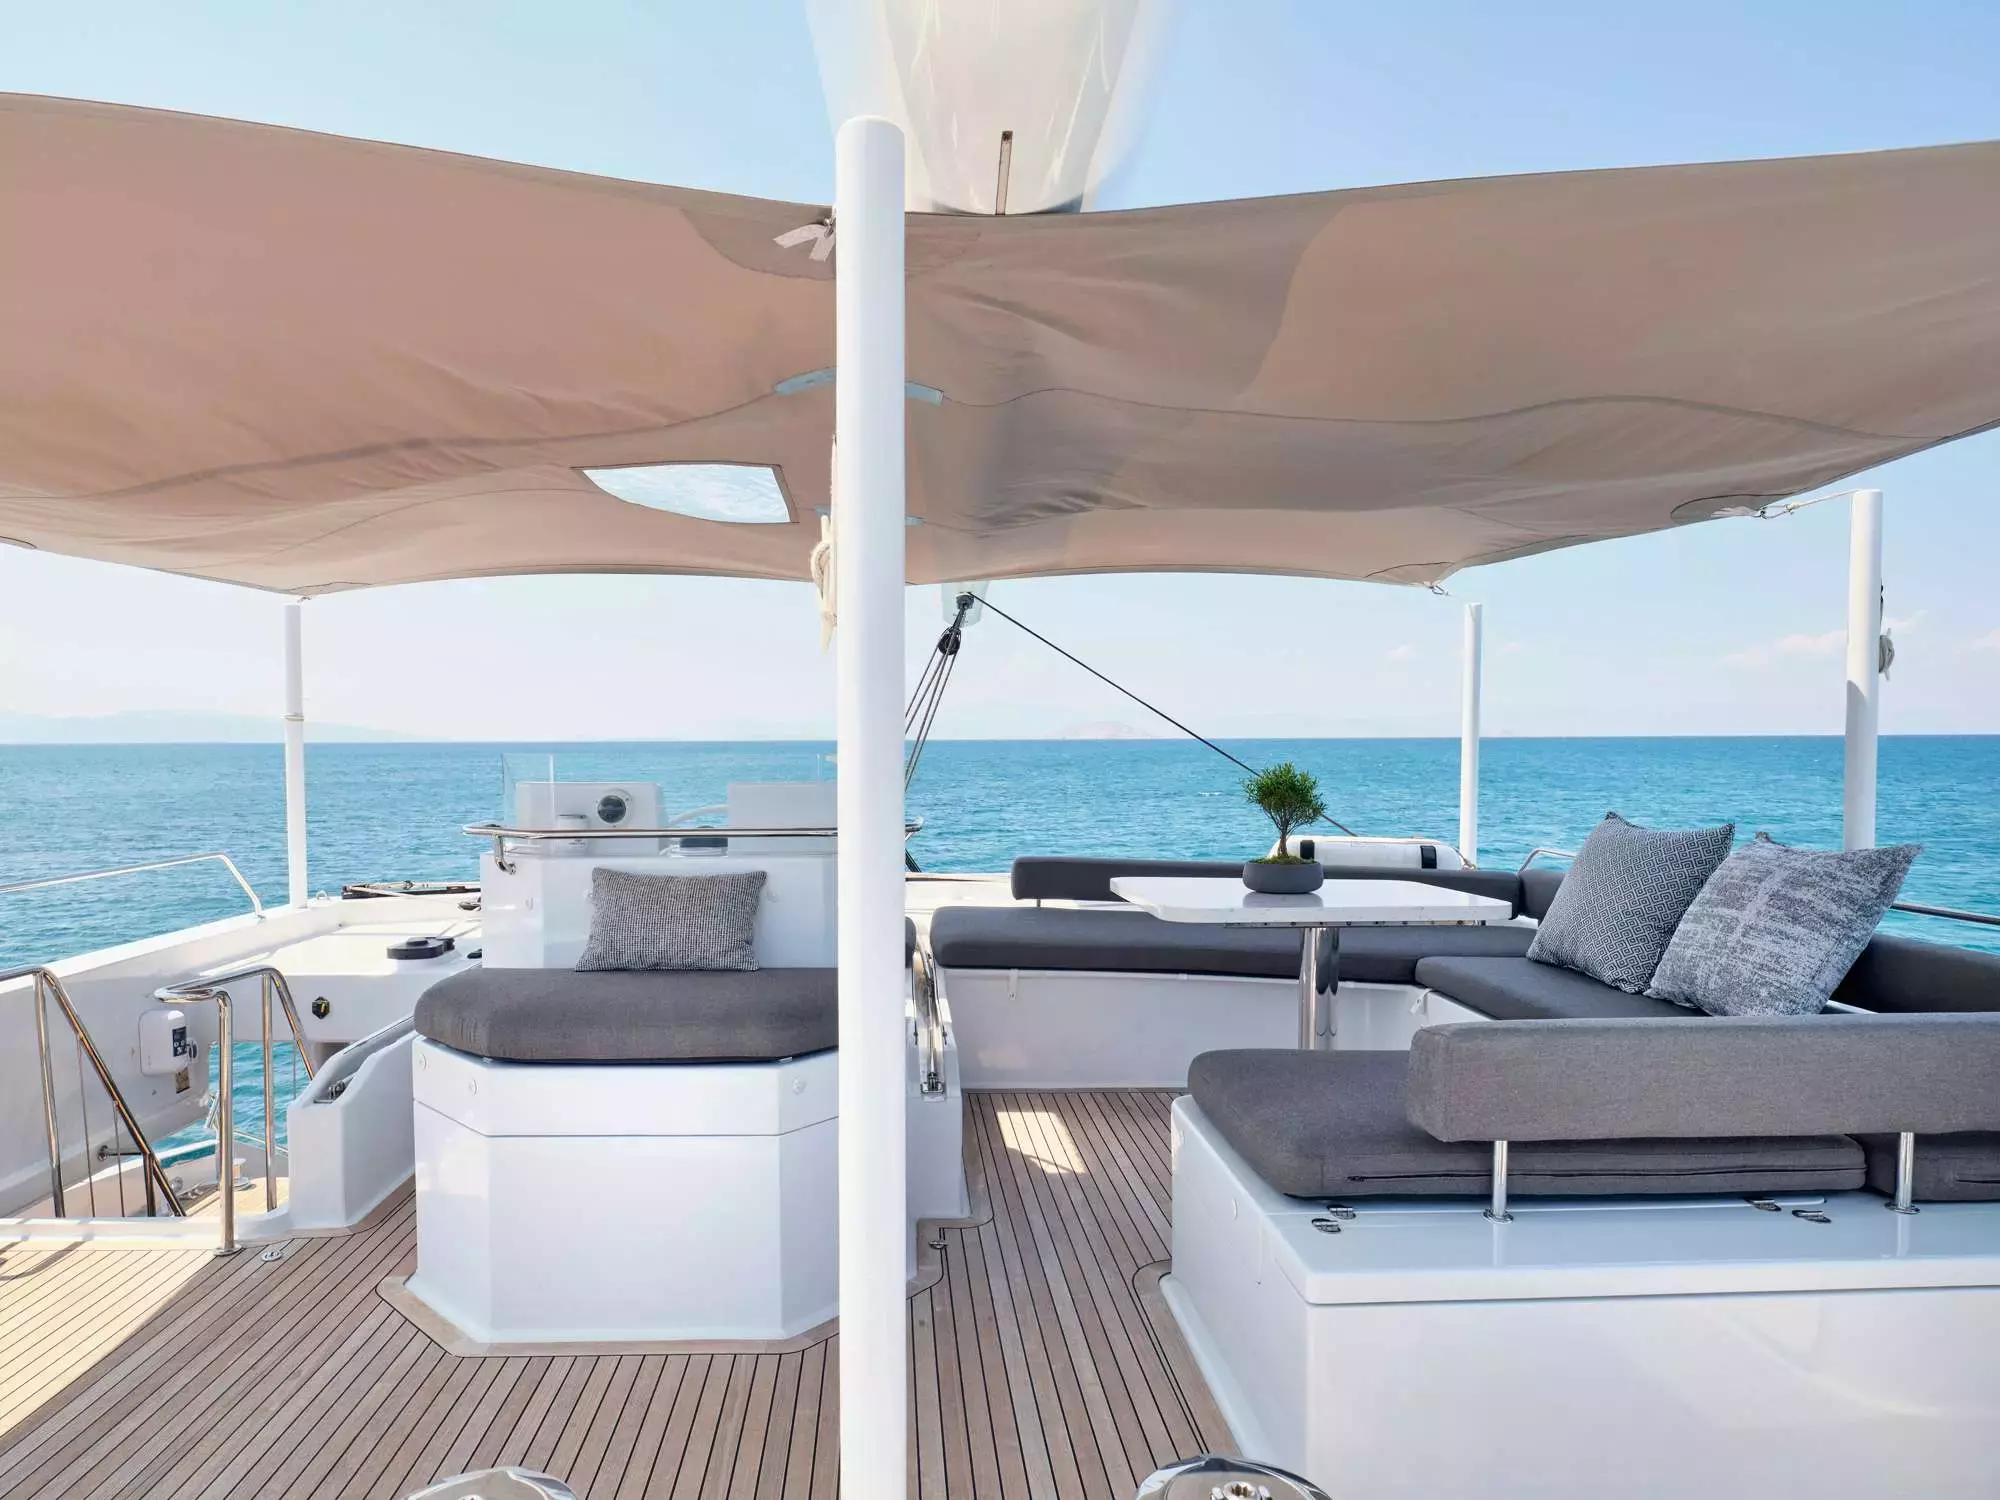 Sameli by Two Oceans - Top rates for a Rental of a private Sailing Catamaran in Greece